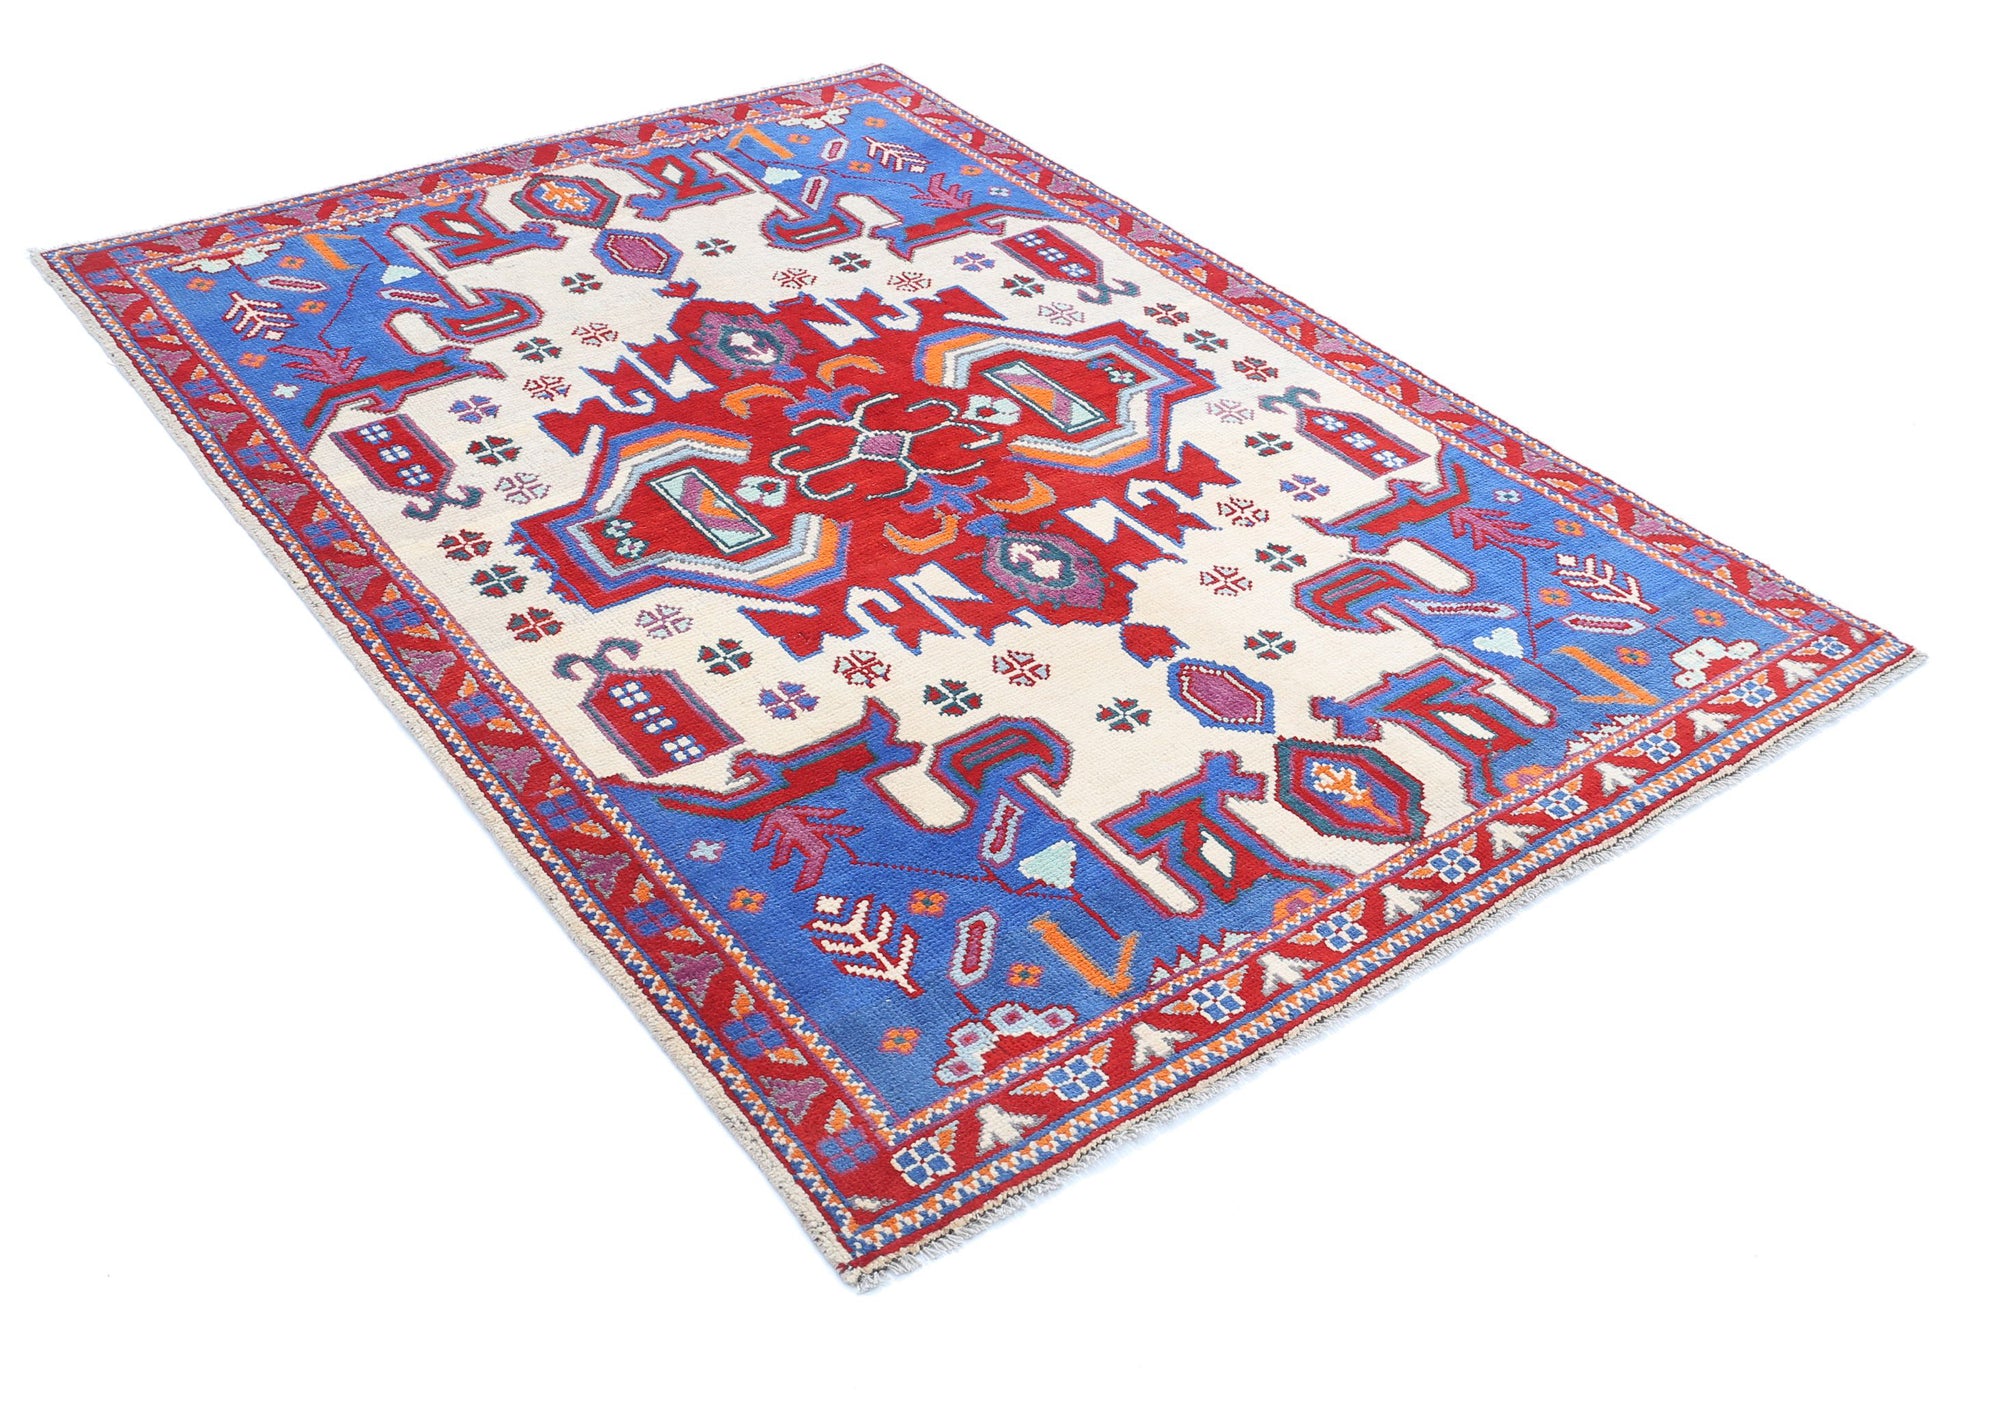 Revival-hand-knotted-qarghani-wool-rug-5014094-1.jpg